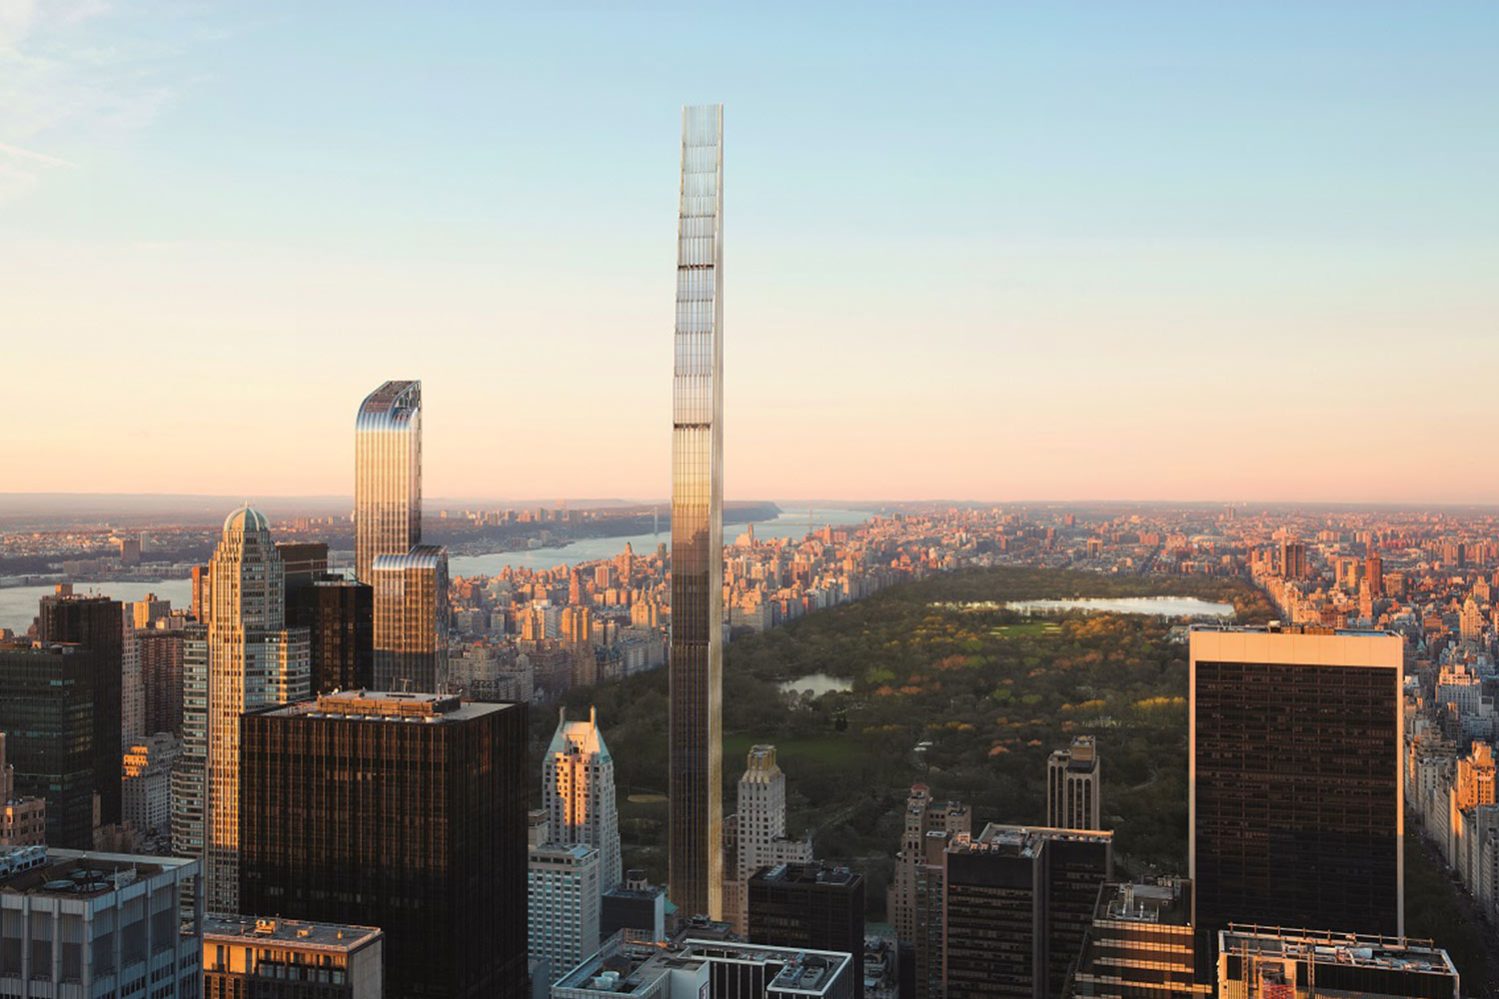 The thinnest skyscraper in the world has been completed in New York